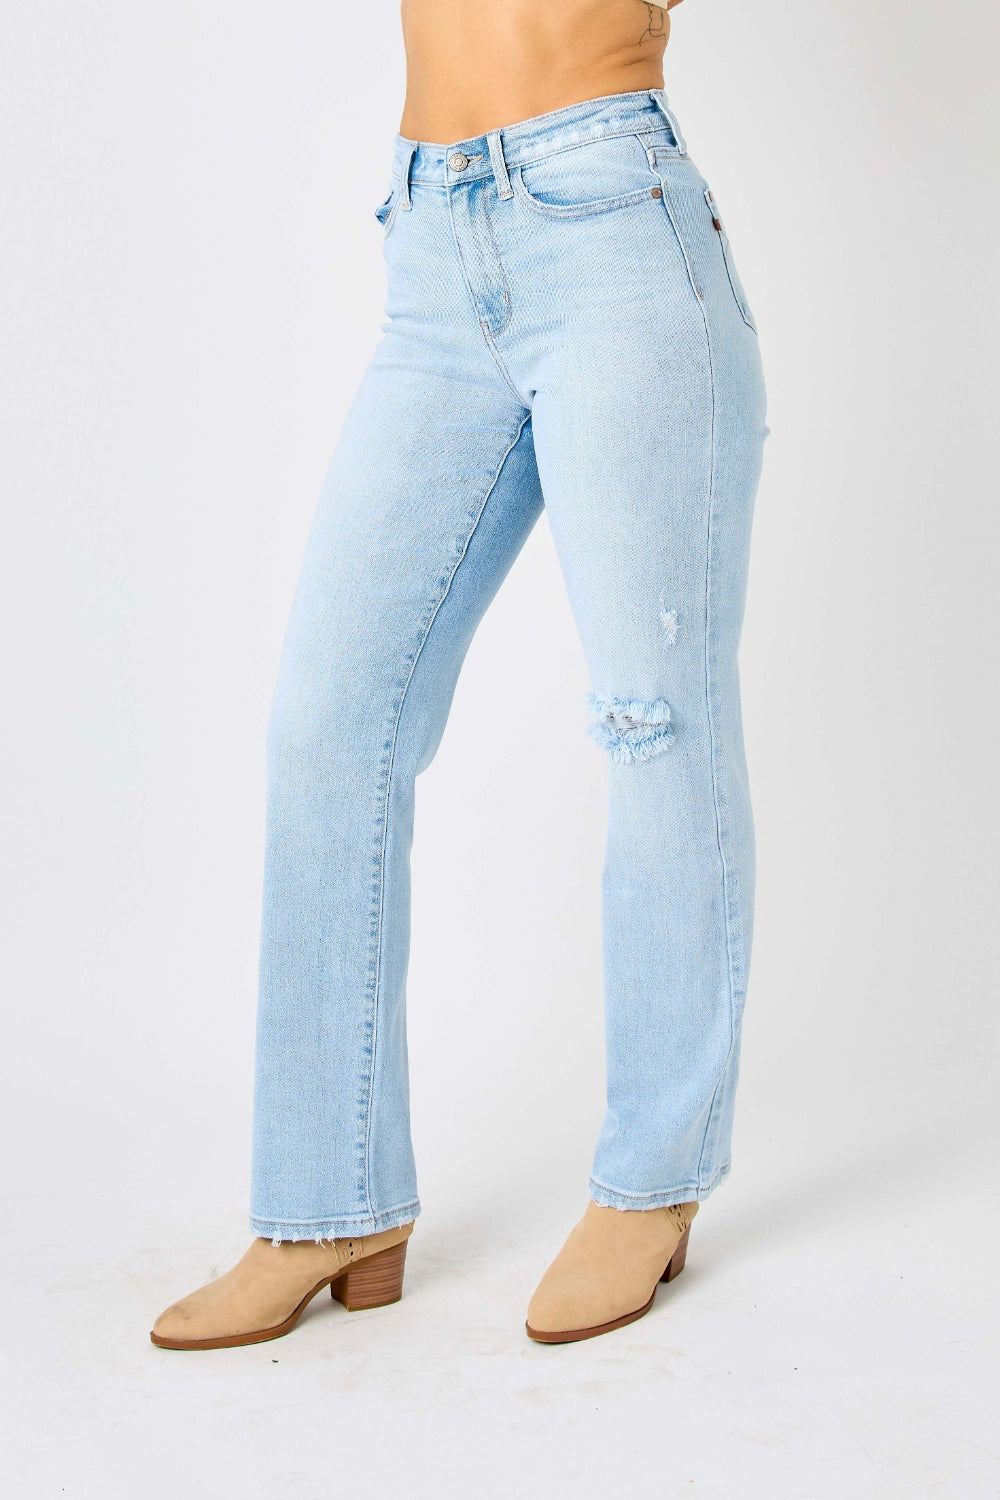 Judy Blue Full Size High Waist Distressed Straight Jeans pants Krazy Heart Designs Boutique   